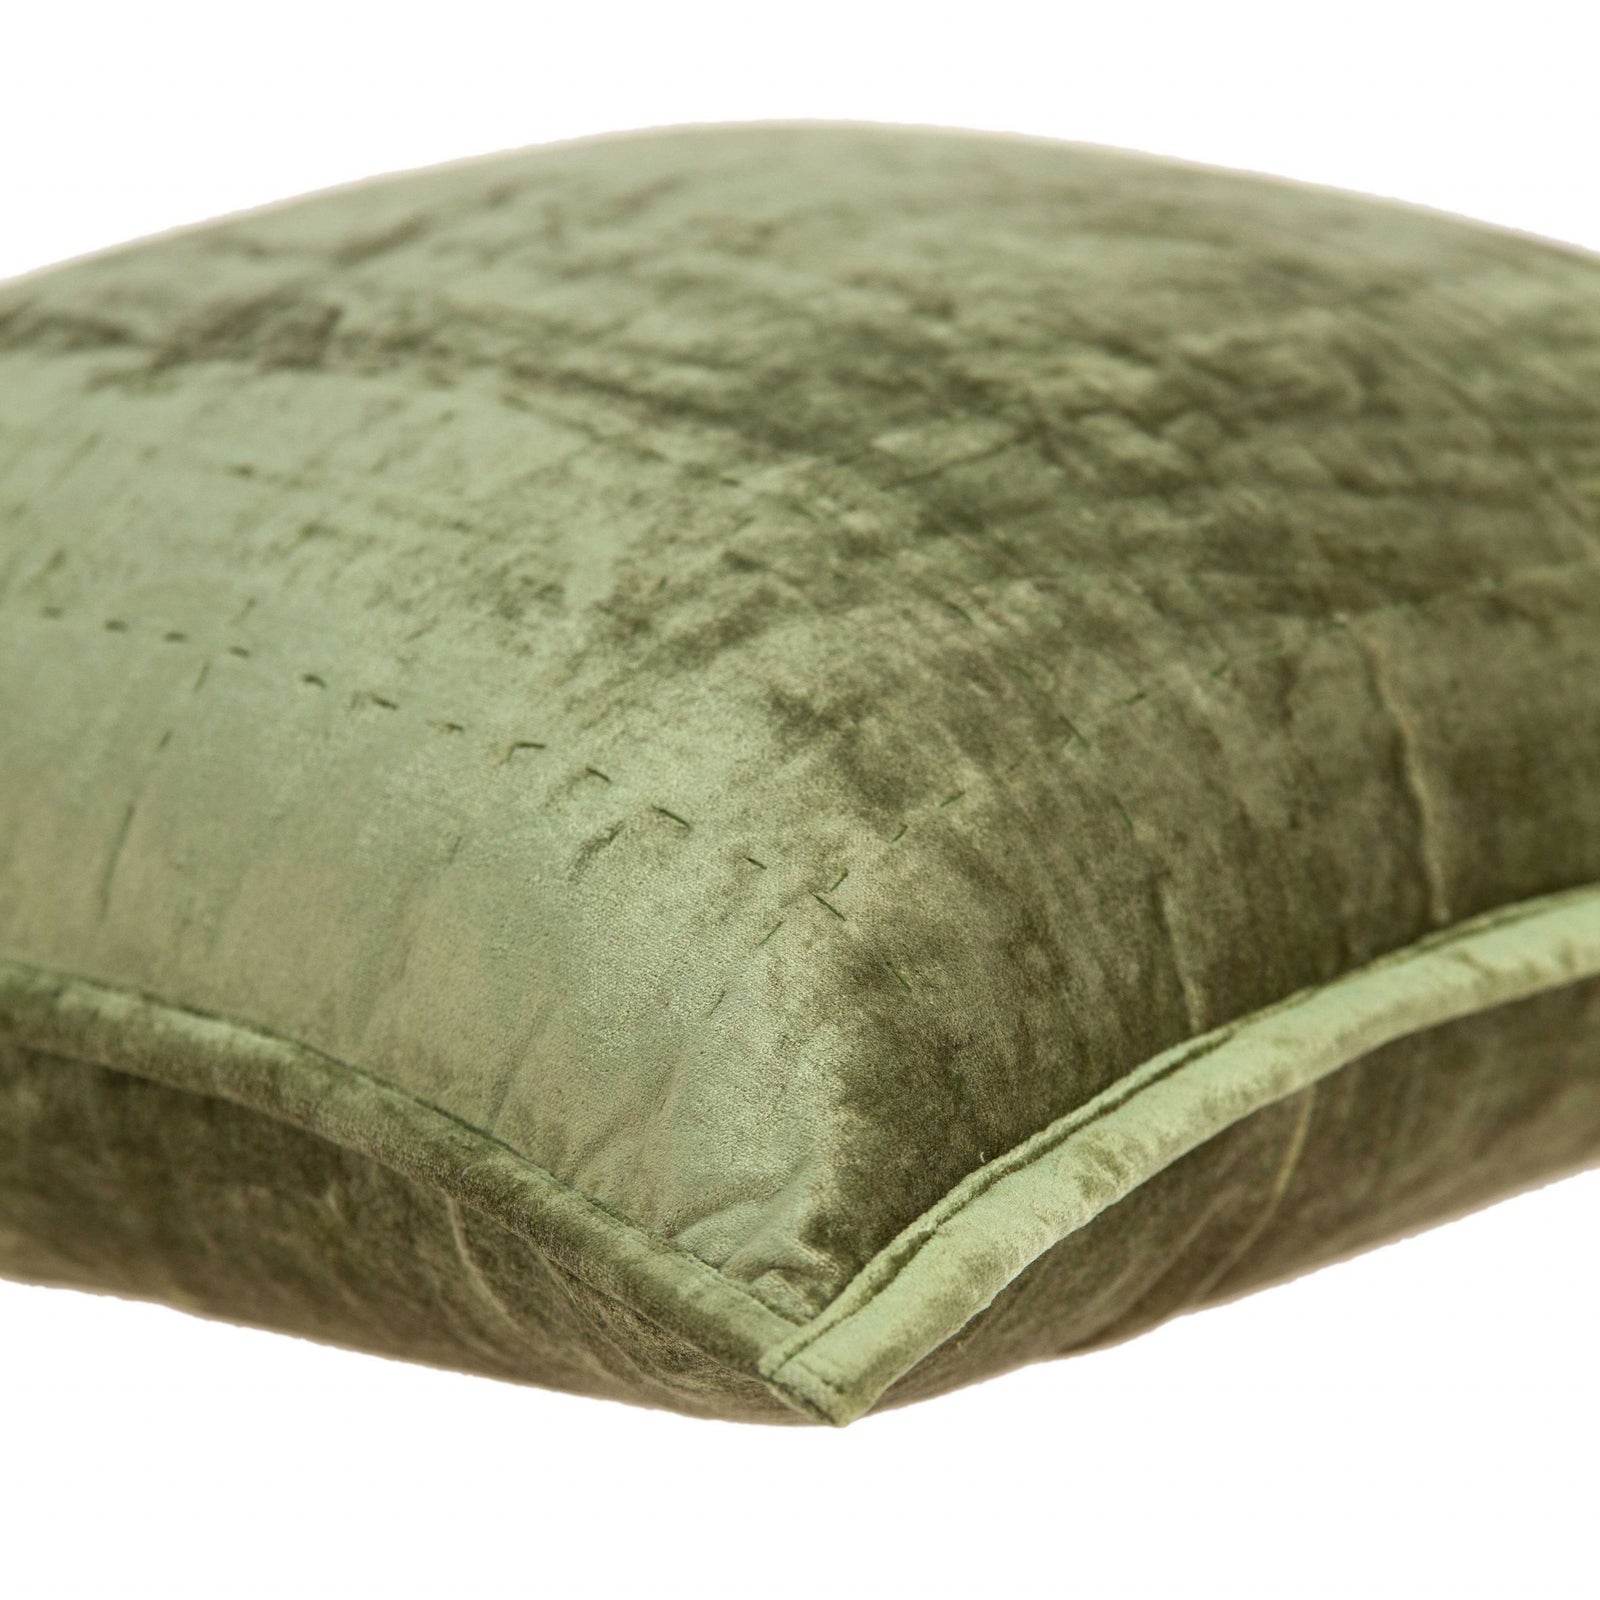 20" X 7" X 20" Transitional Olive Solid Quilted Pillow Cover With Poly Insert